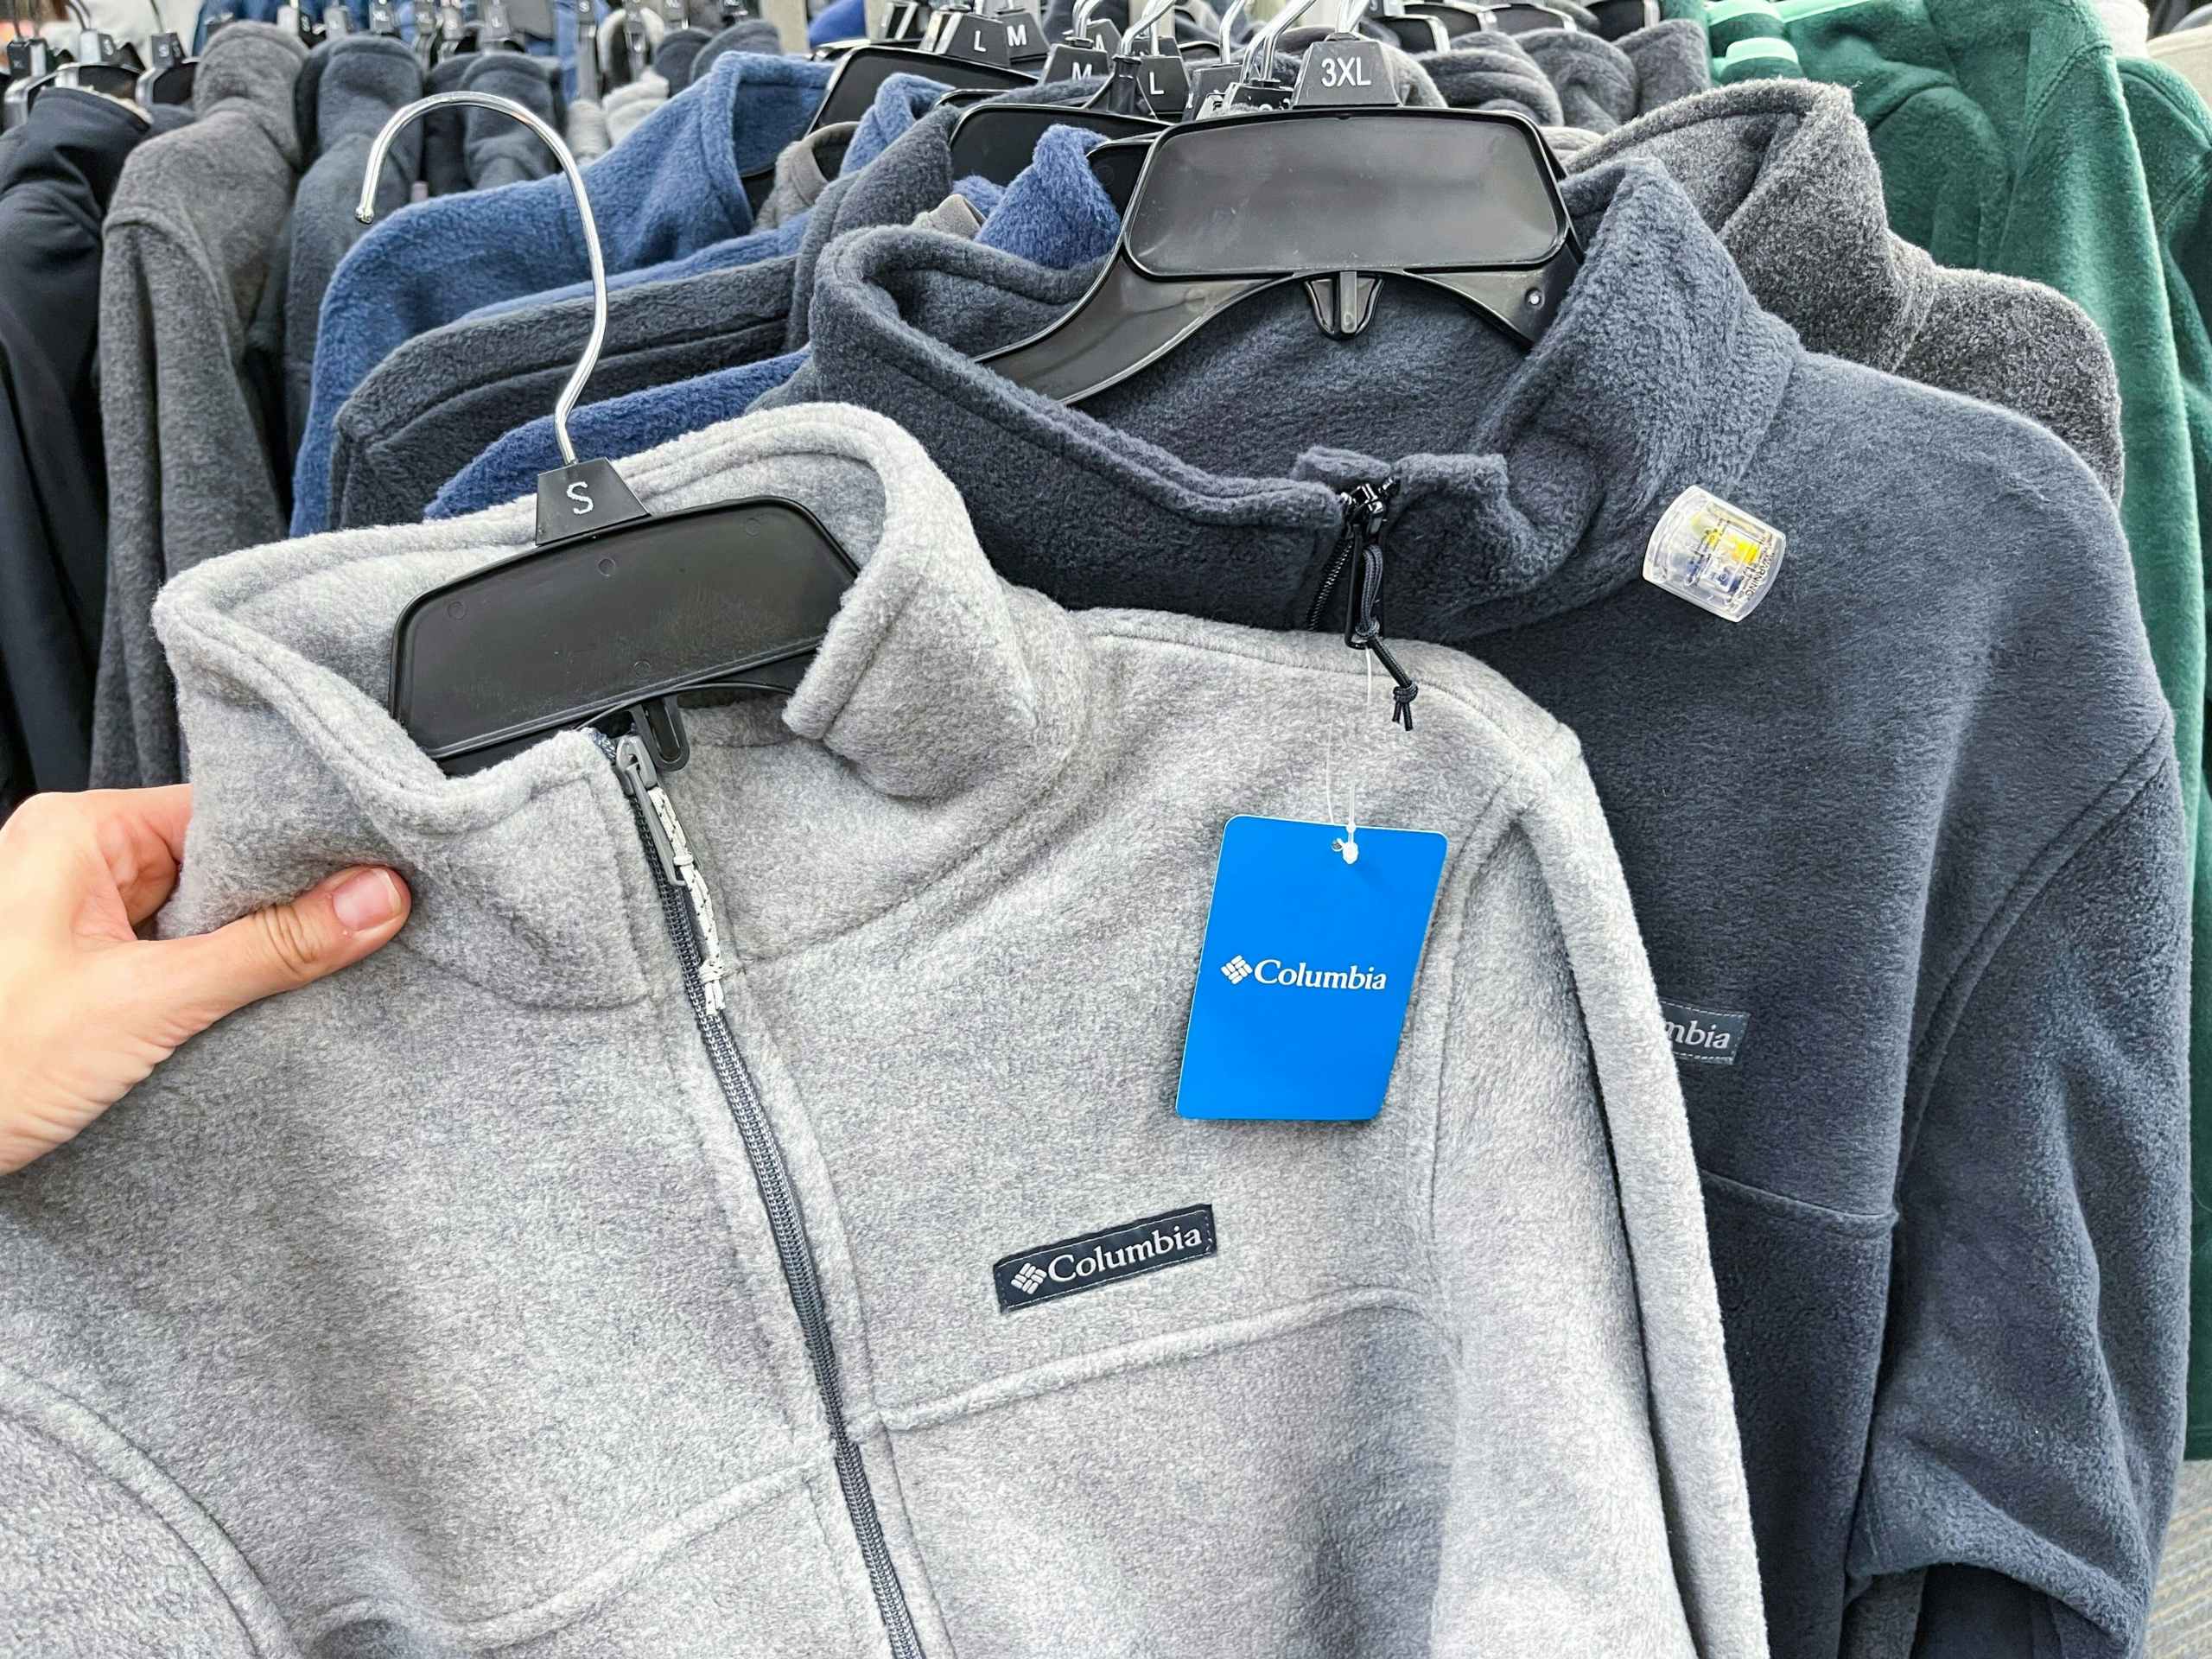 Columbia Adult Fleece Pullovers, Under $20 Shipped (Over 70% Off)